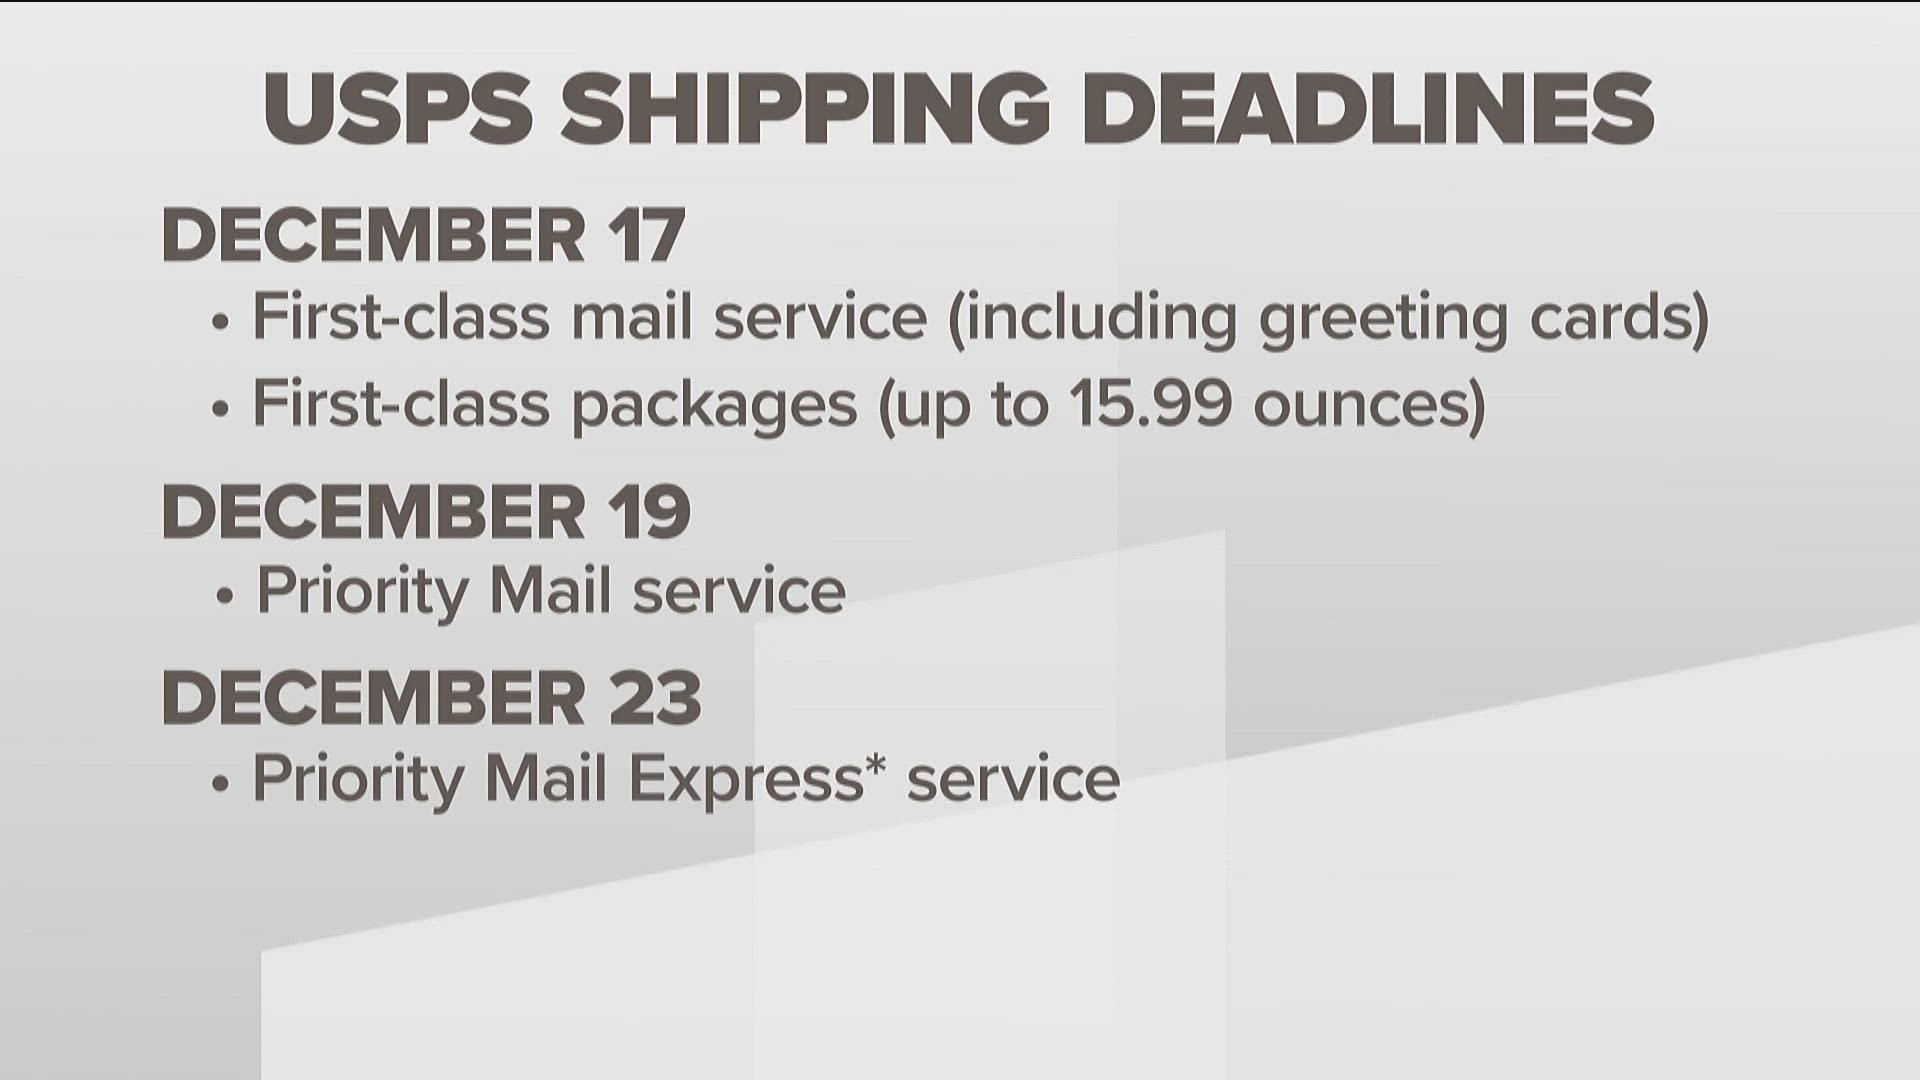 The dates have been announced to help people work out their shipping plans.